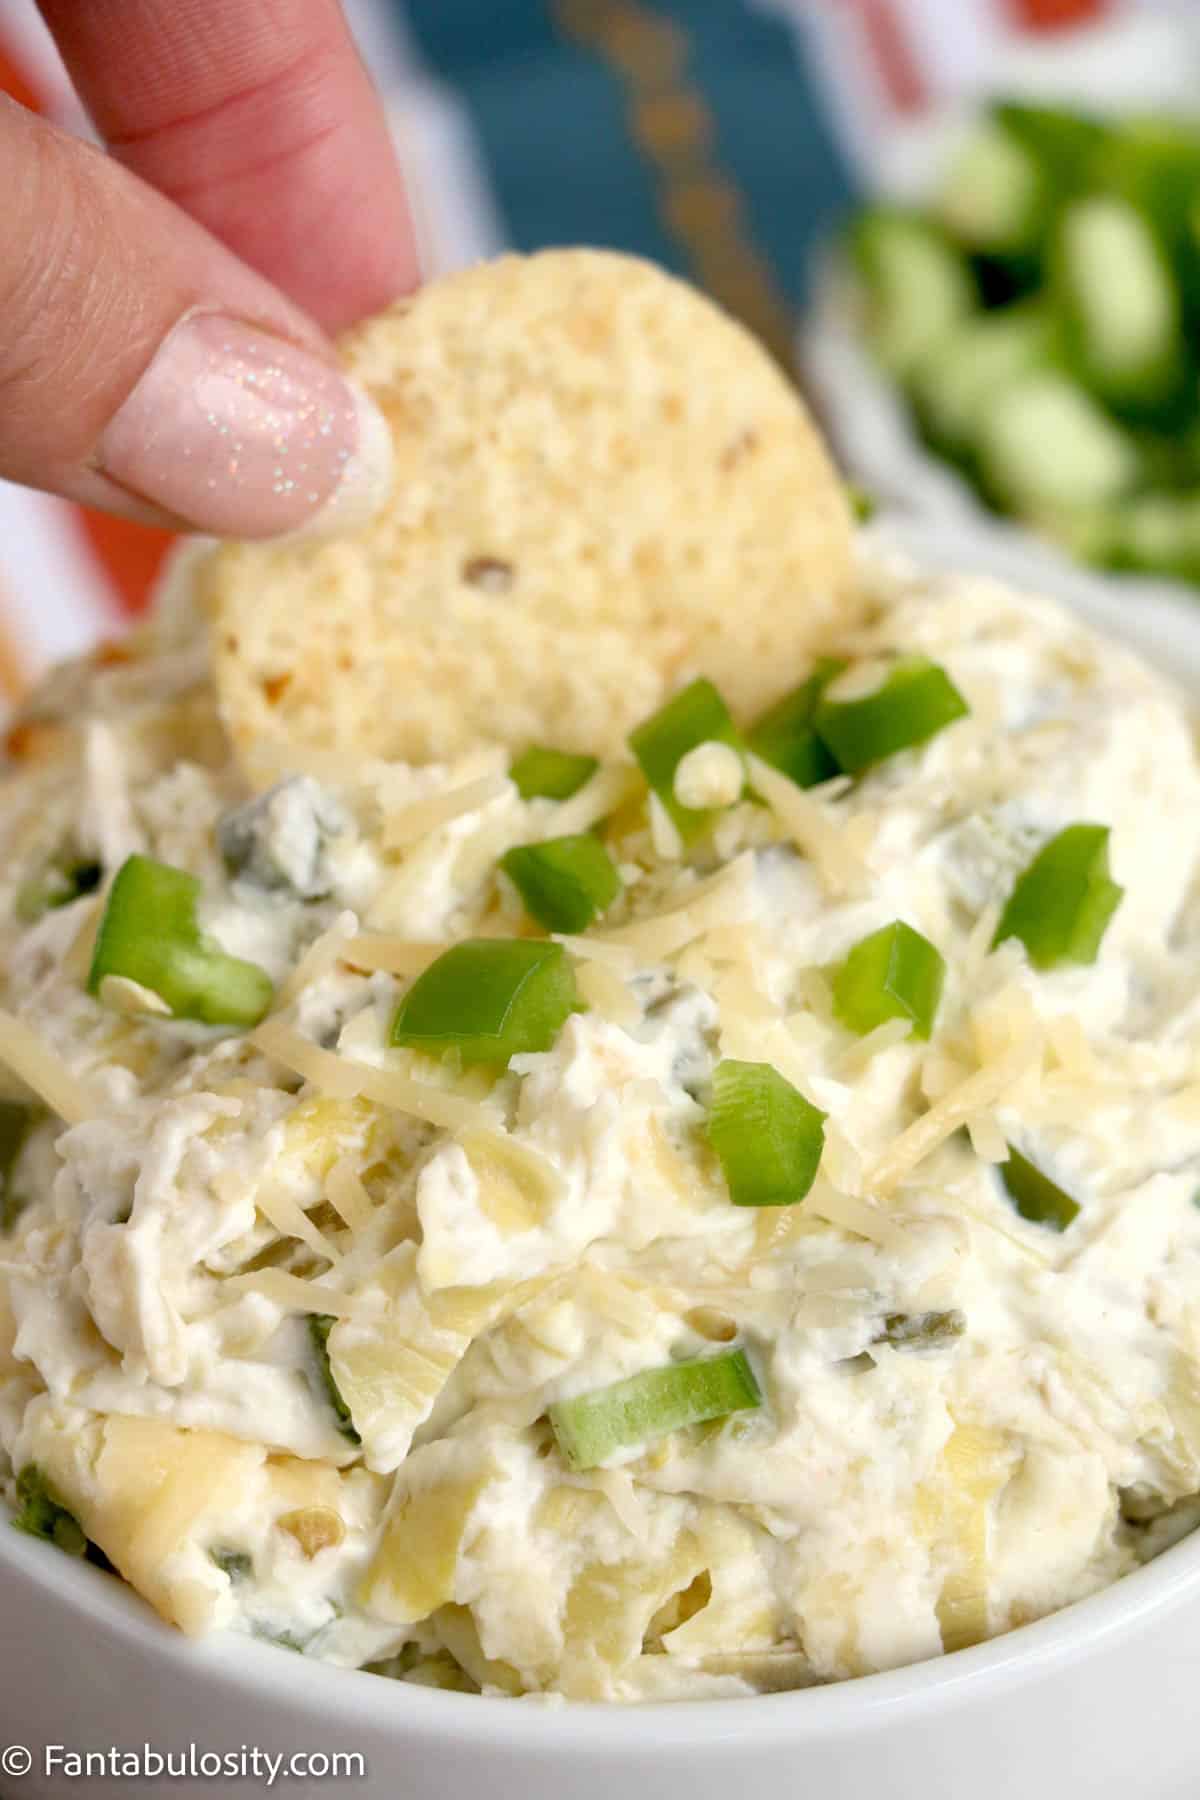 A tortilla chip being dipped in a bowl of jalapeño artichoke dip.